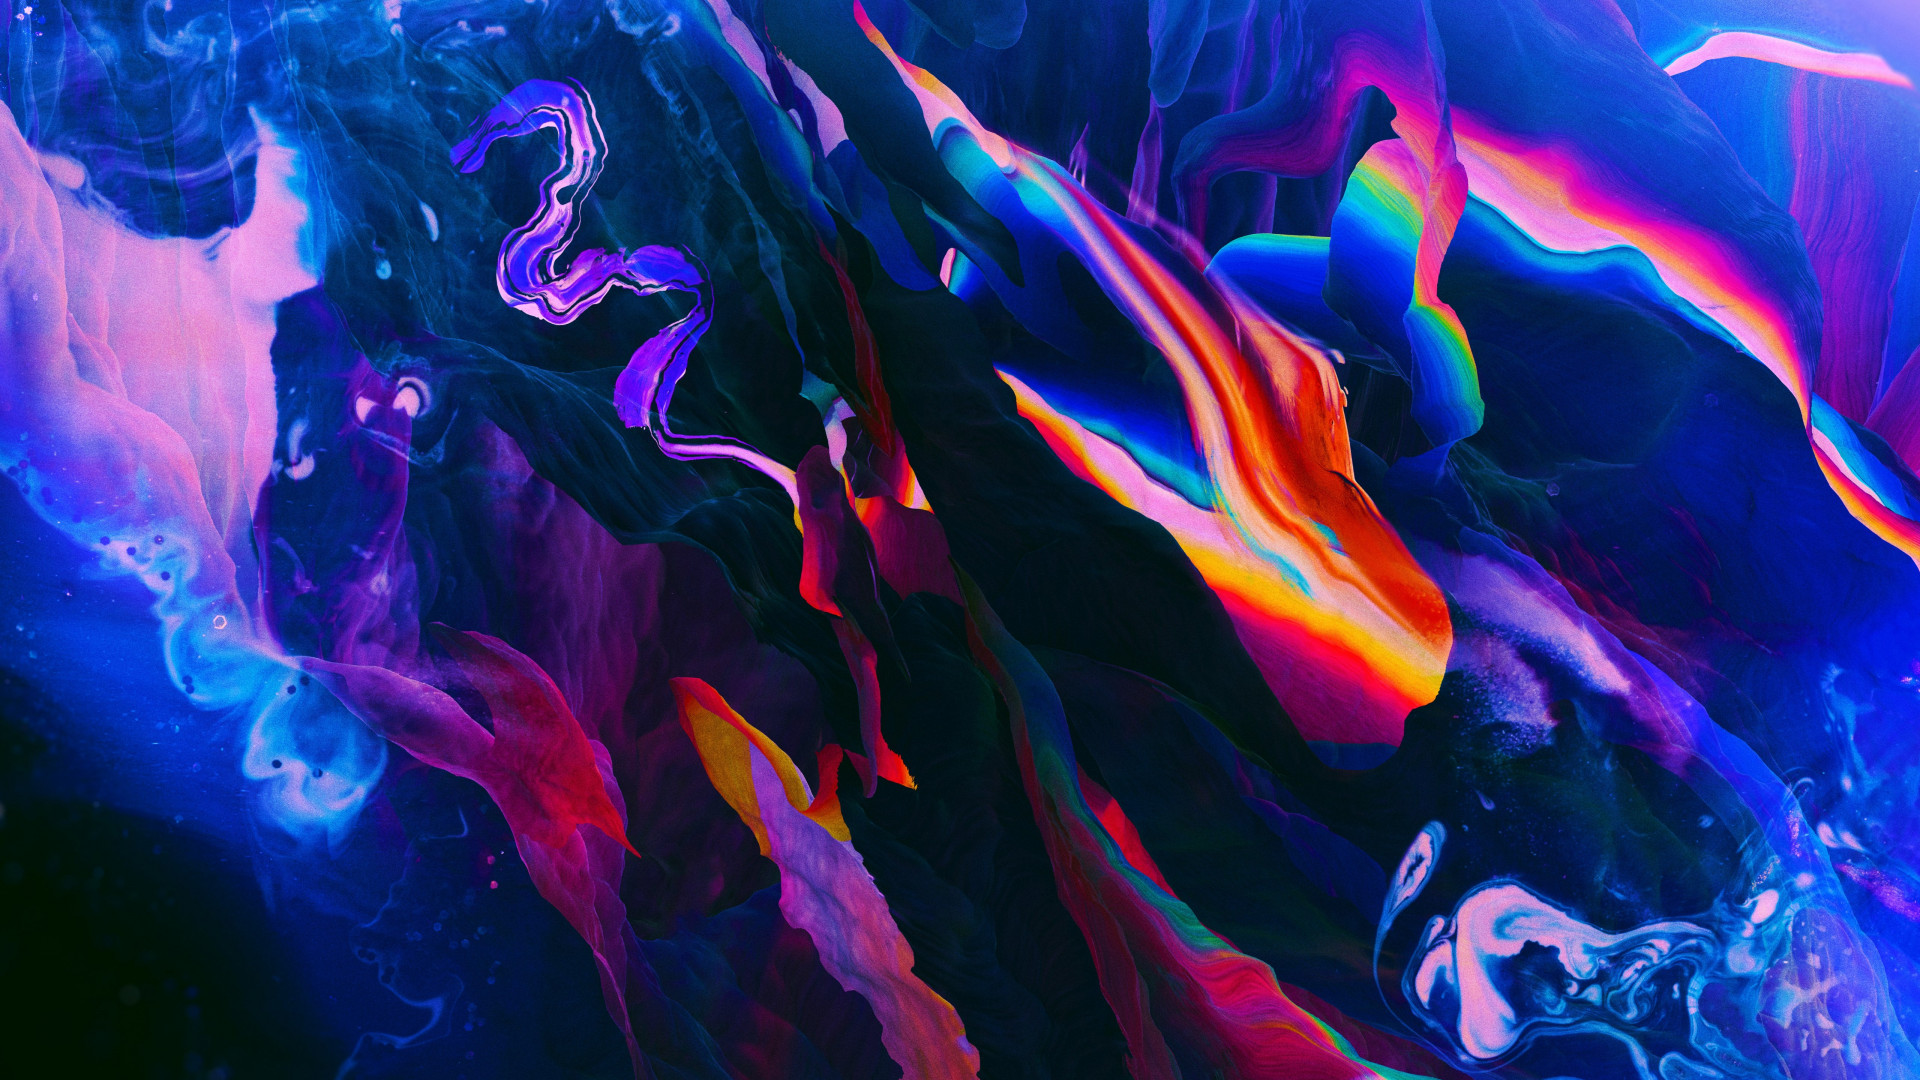 Abstract colorful wallpaper 1920x1080